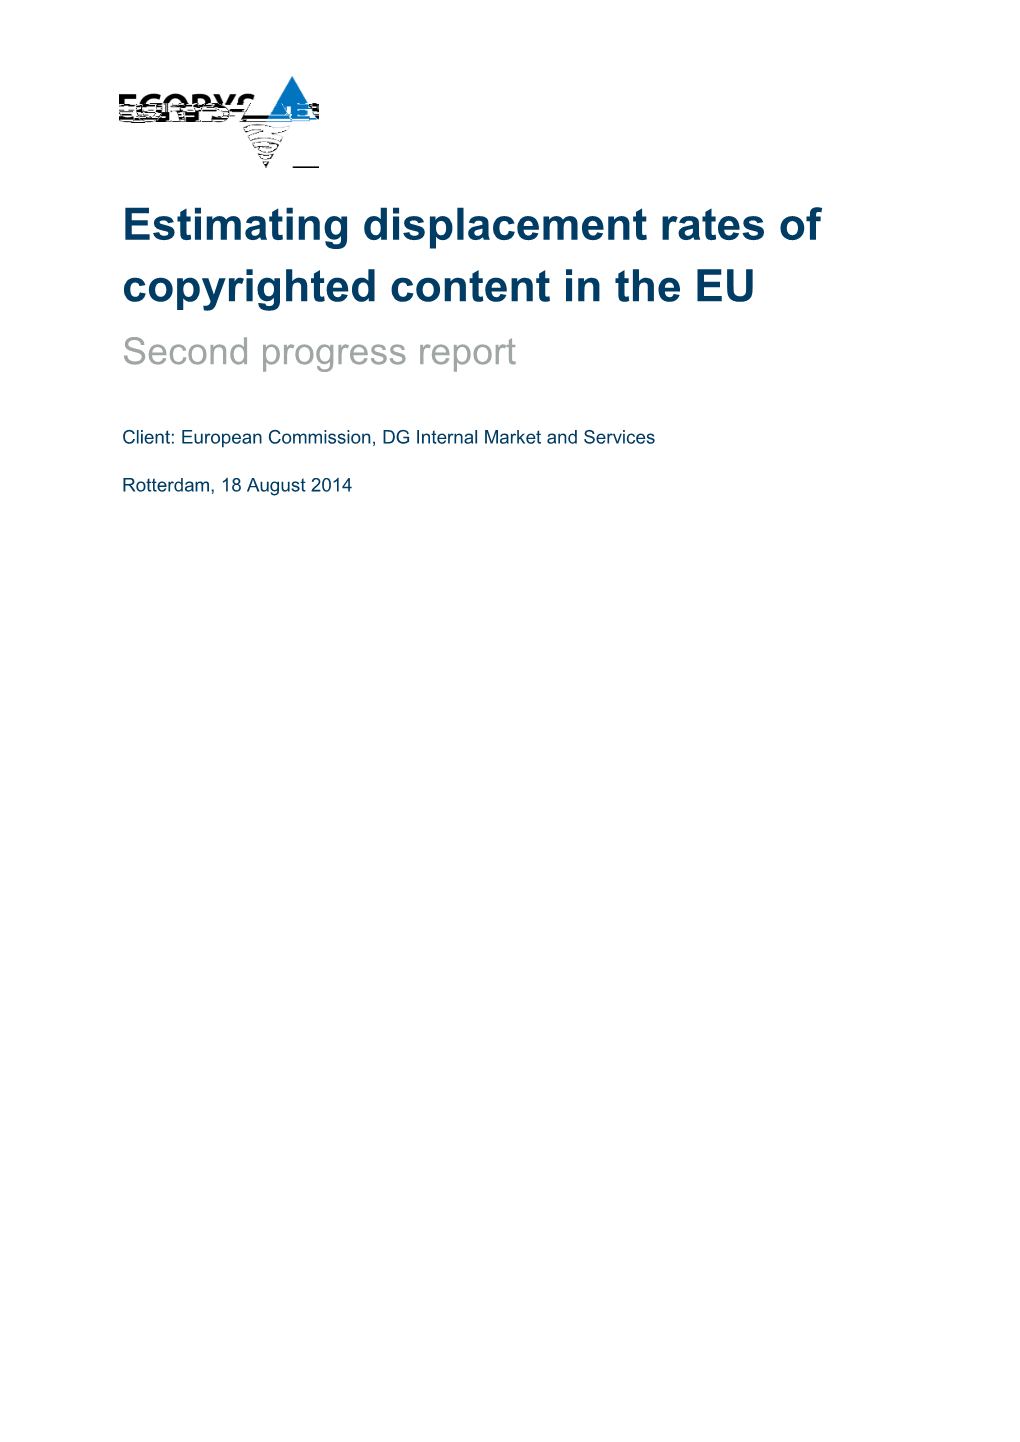 Estimating Displacement Rates of Copyrighted Content in the EU Second Progress Report